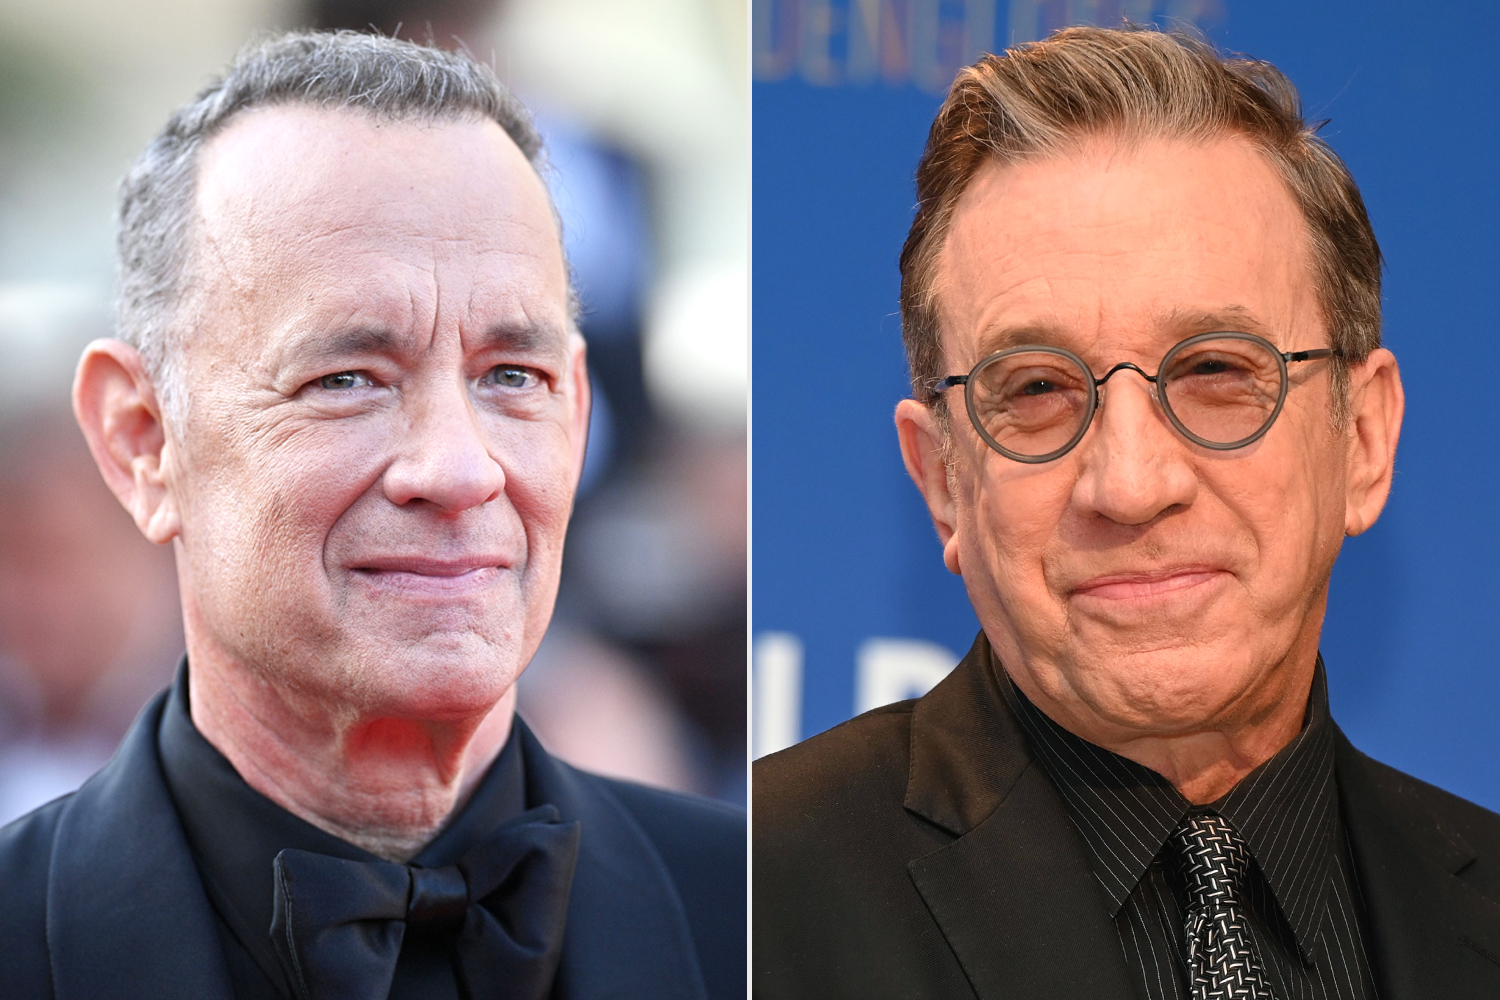 Tom Hanks Jokingly Says He Doesn't 'Understand' a Buzz Lightyear Movie Without Tim Allen